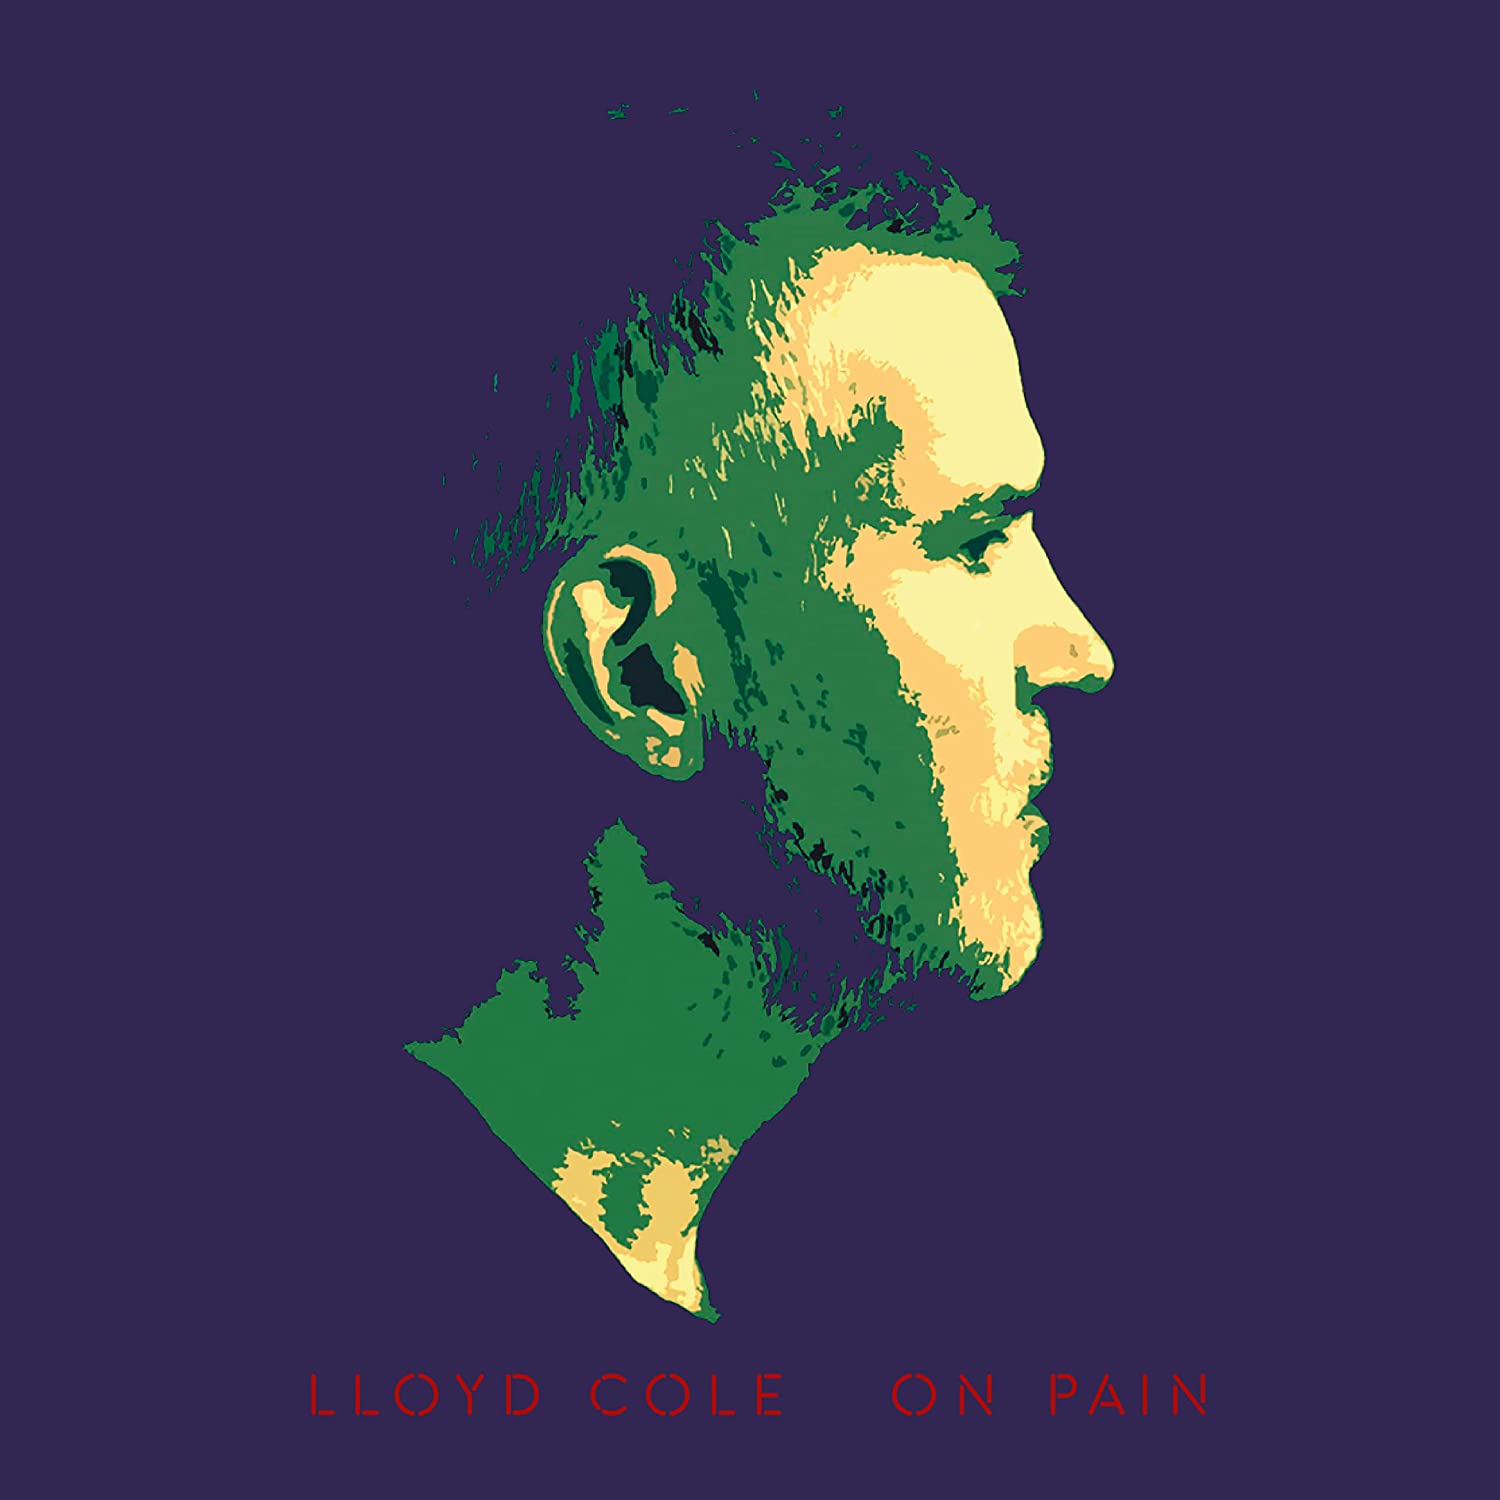 Lloyd Cole to release new solo album "On Pain" in June, tour UK later